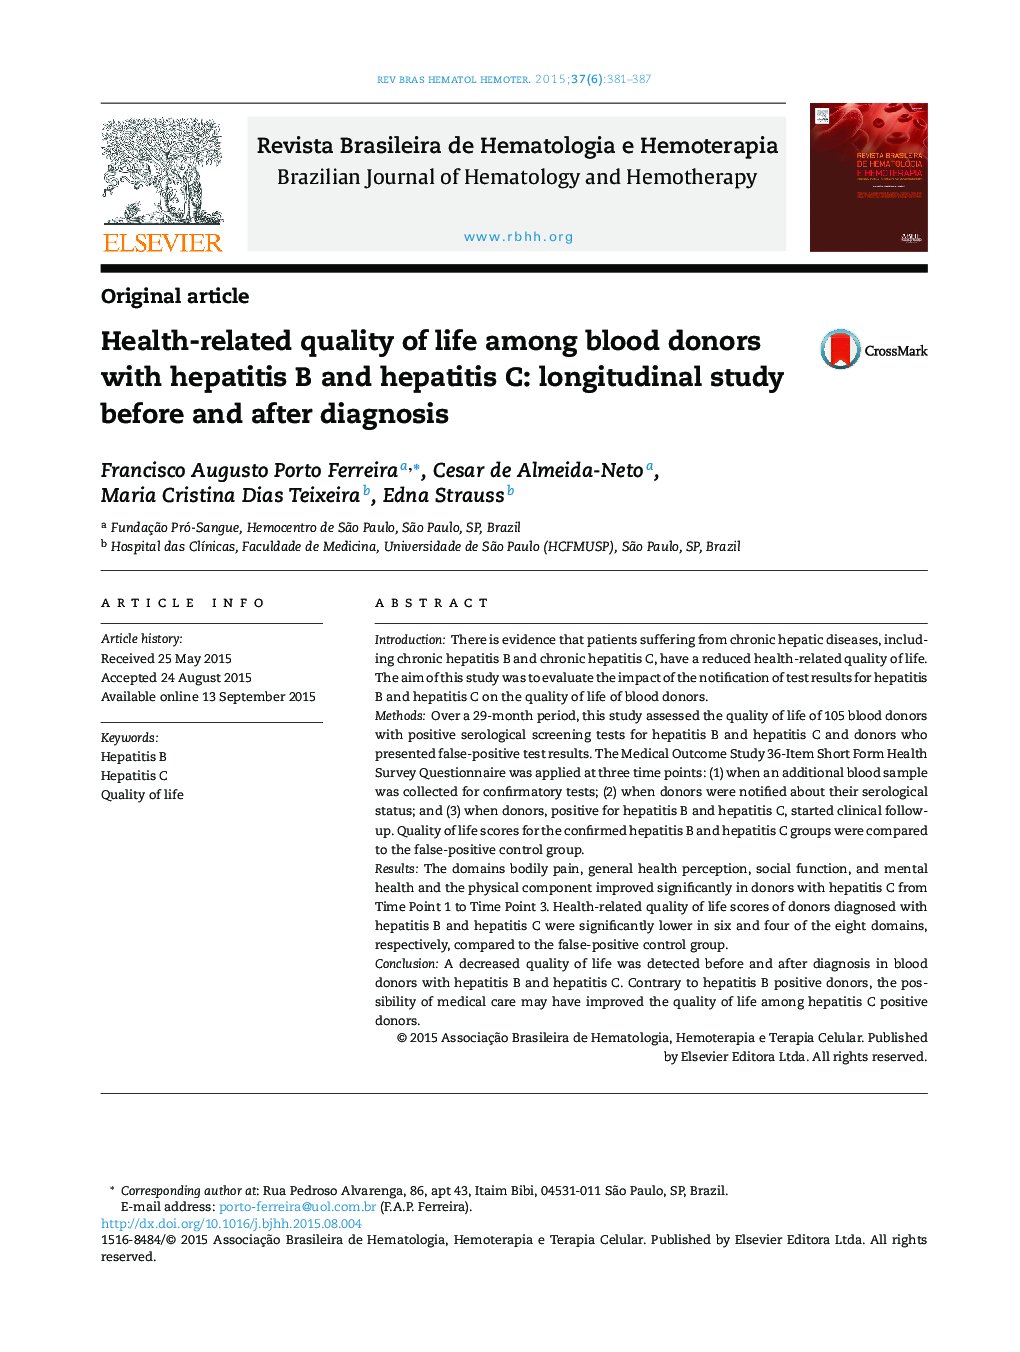 Health-related quality of life among blood donors with hepatitis B and hepatitis C: longitudinal study before and after diagnosis